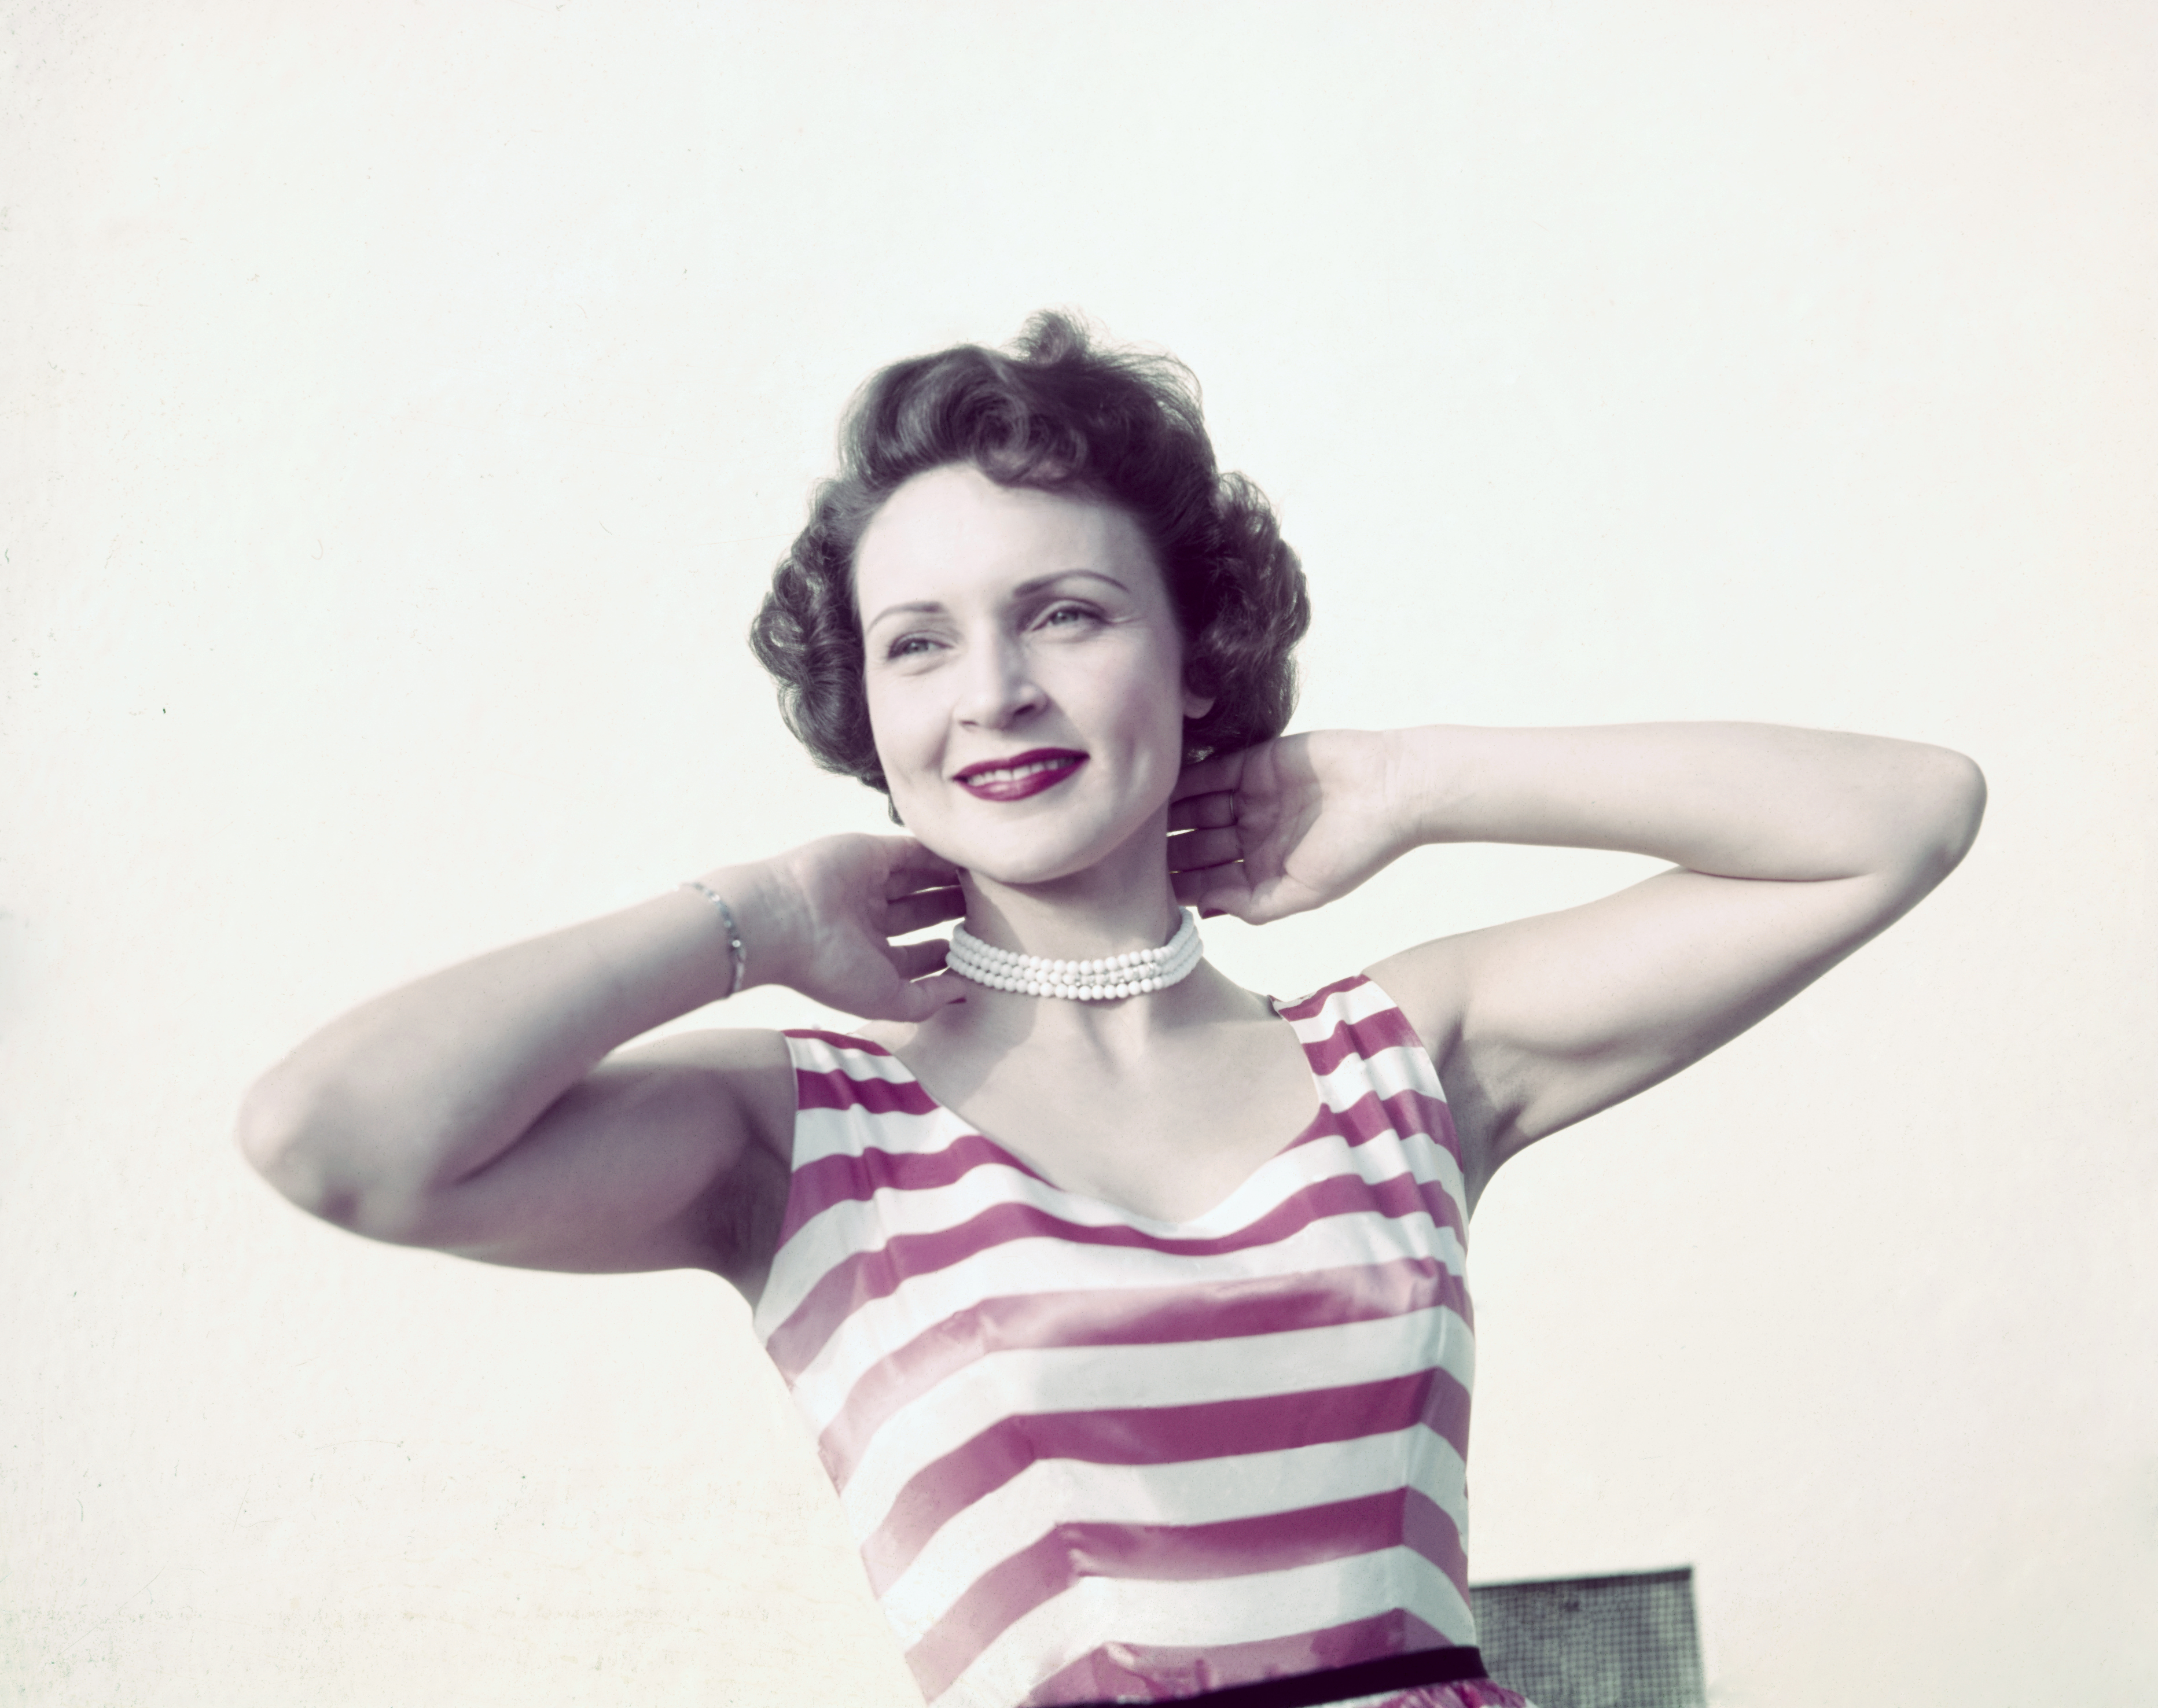 Betty White, vers 1954 | Source : Getty Images